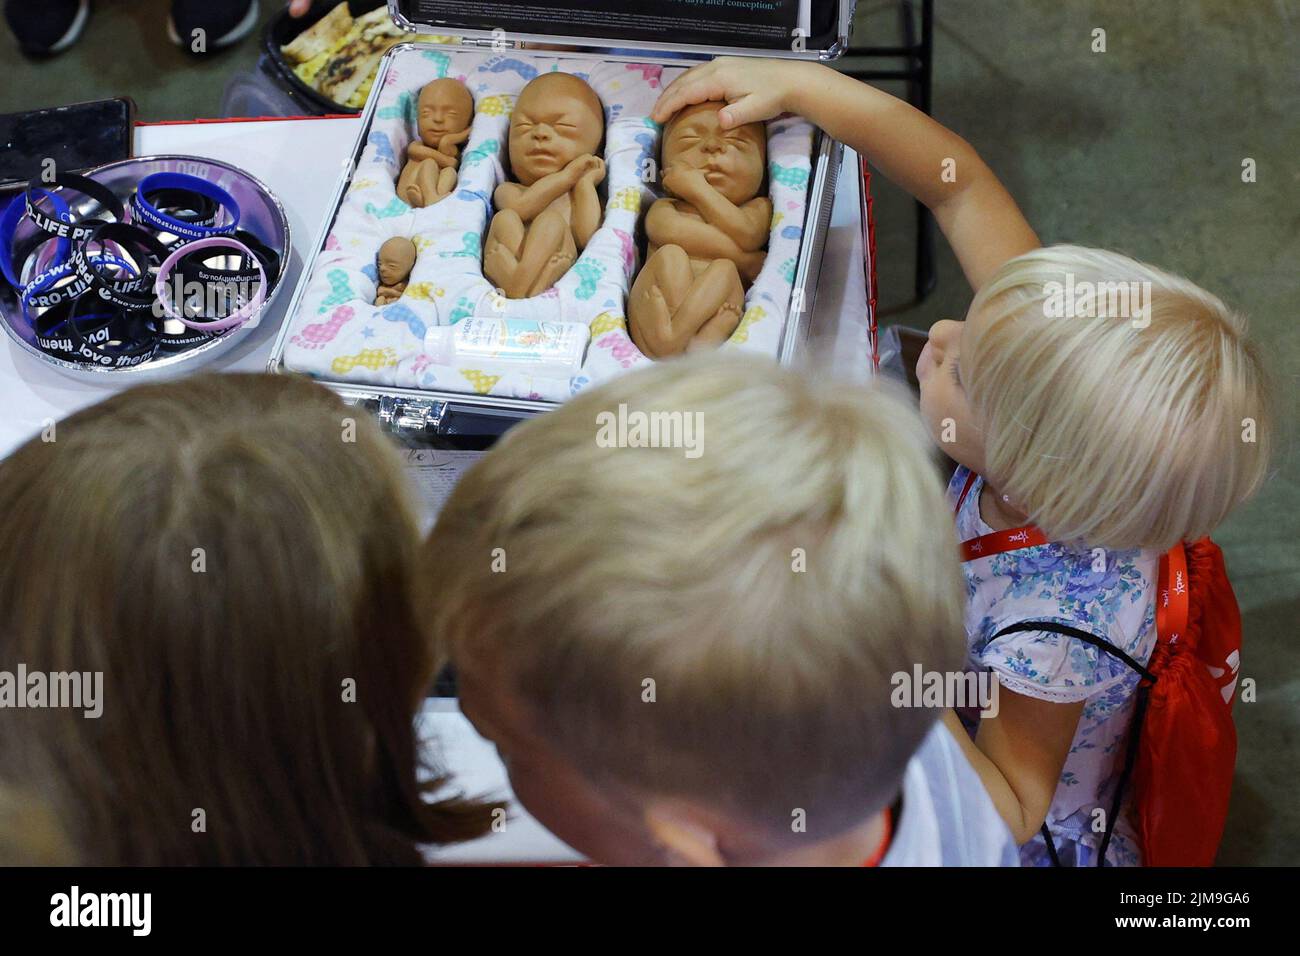 Children look at and touch models of fetuses displayed at by the Students for Life, who oppose abortion, at the Conservative Political Action Conference (CPAC) in Dallas, Texas, U.S., August 4, 2022.  REUTERS/Brian Snyder Stock Photo